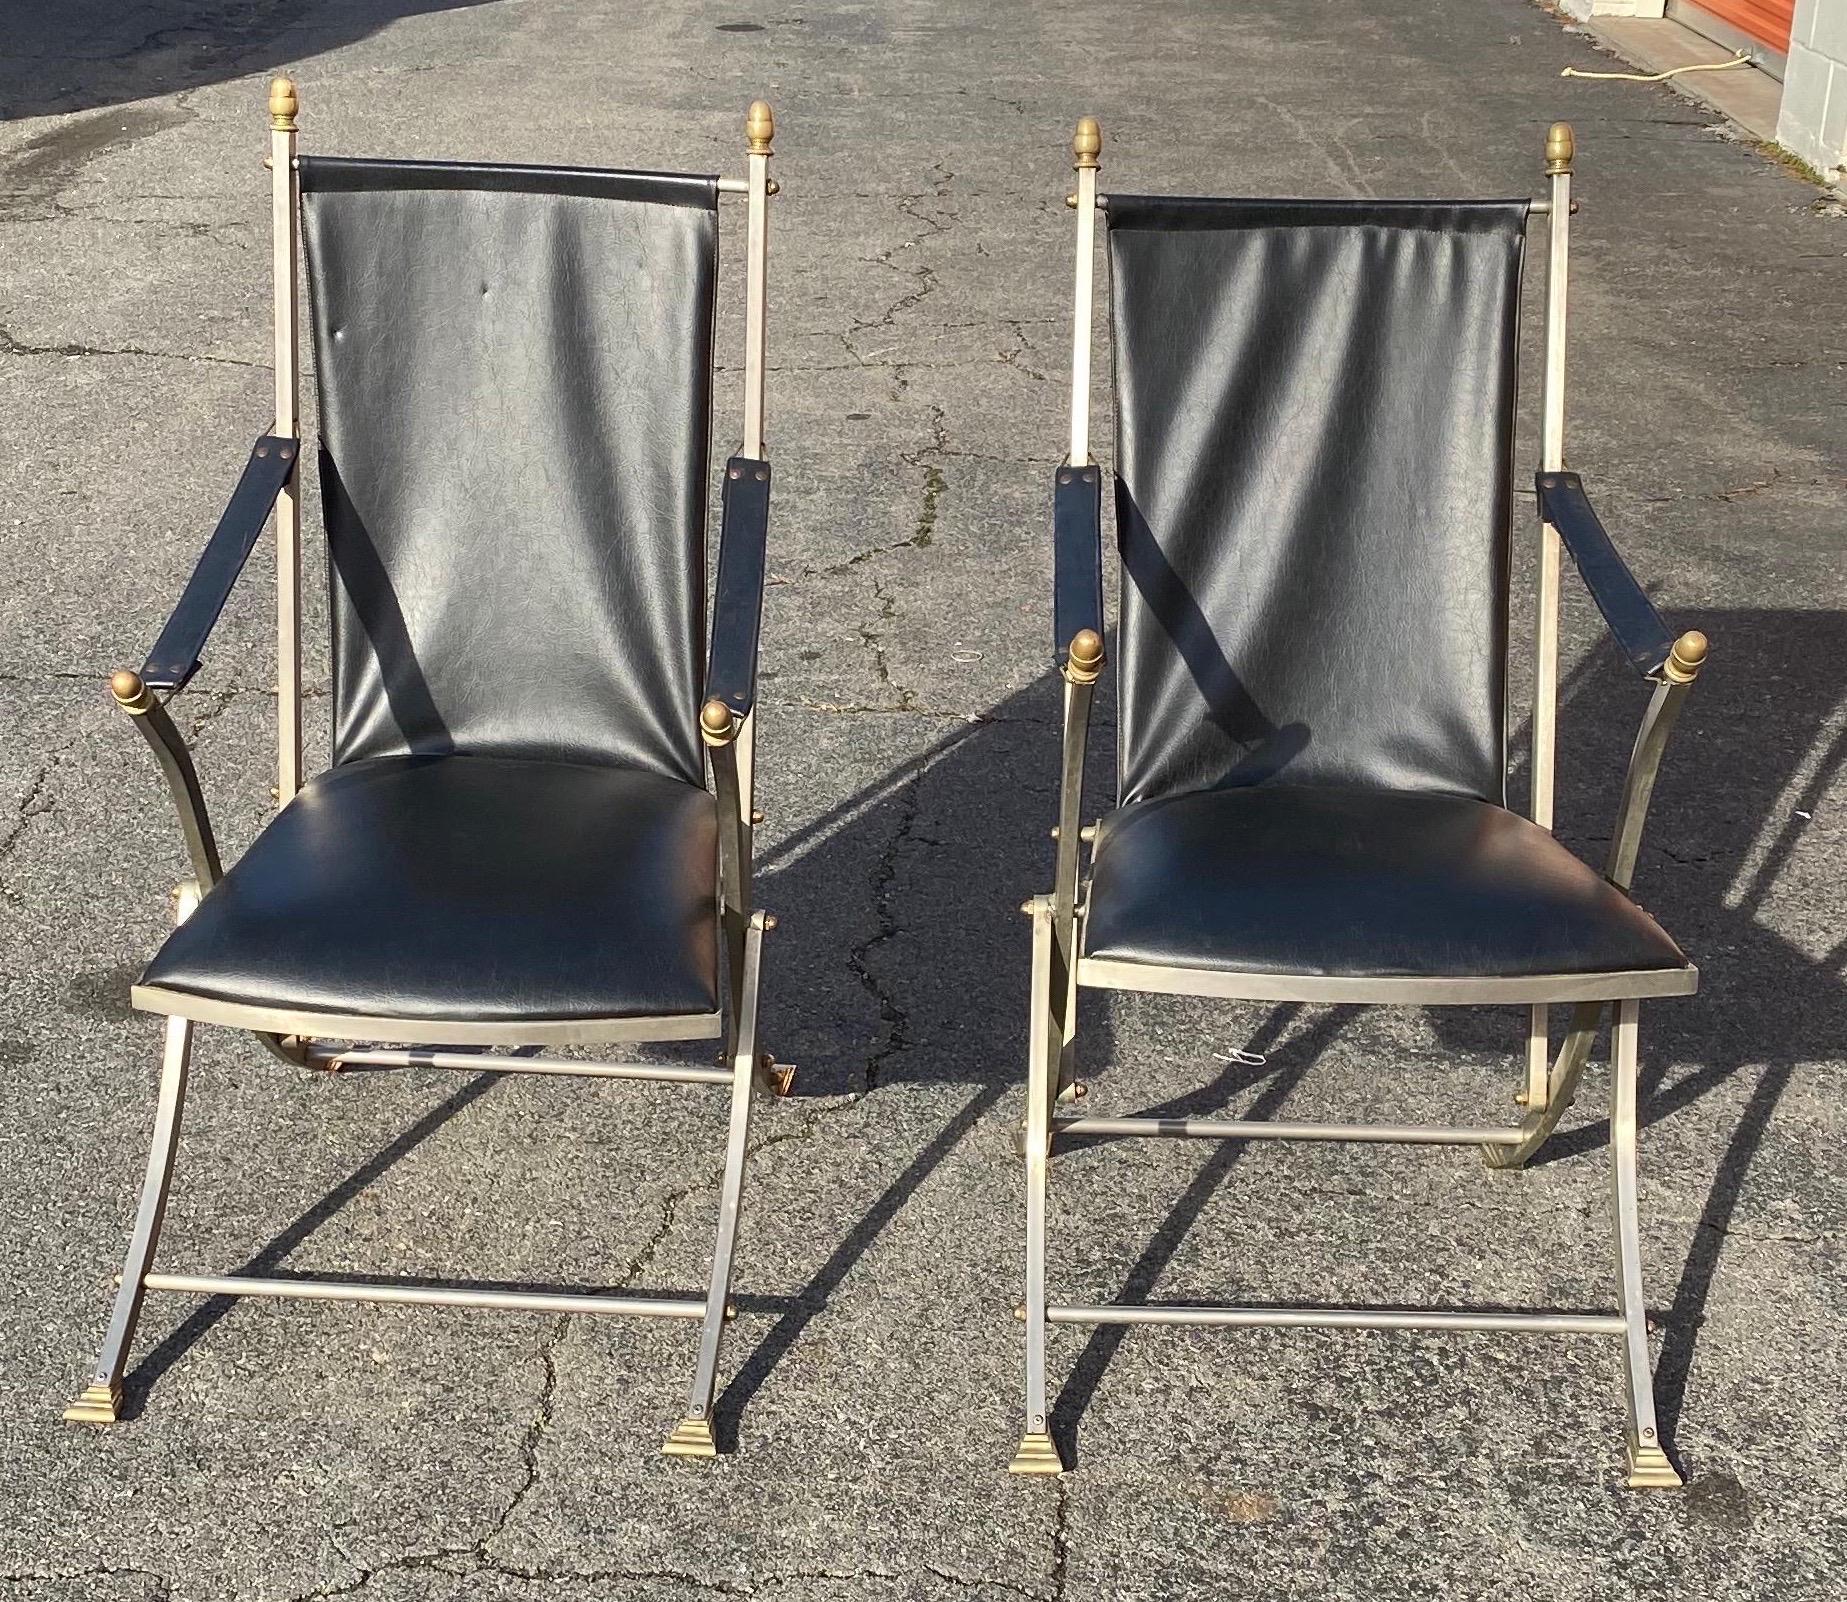 Pair of midcentury Jansen style steel and leather folding campaign chairs.